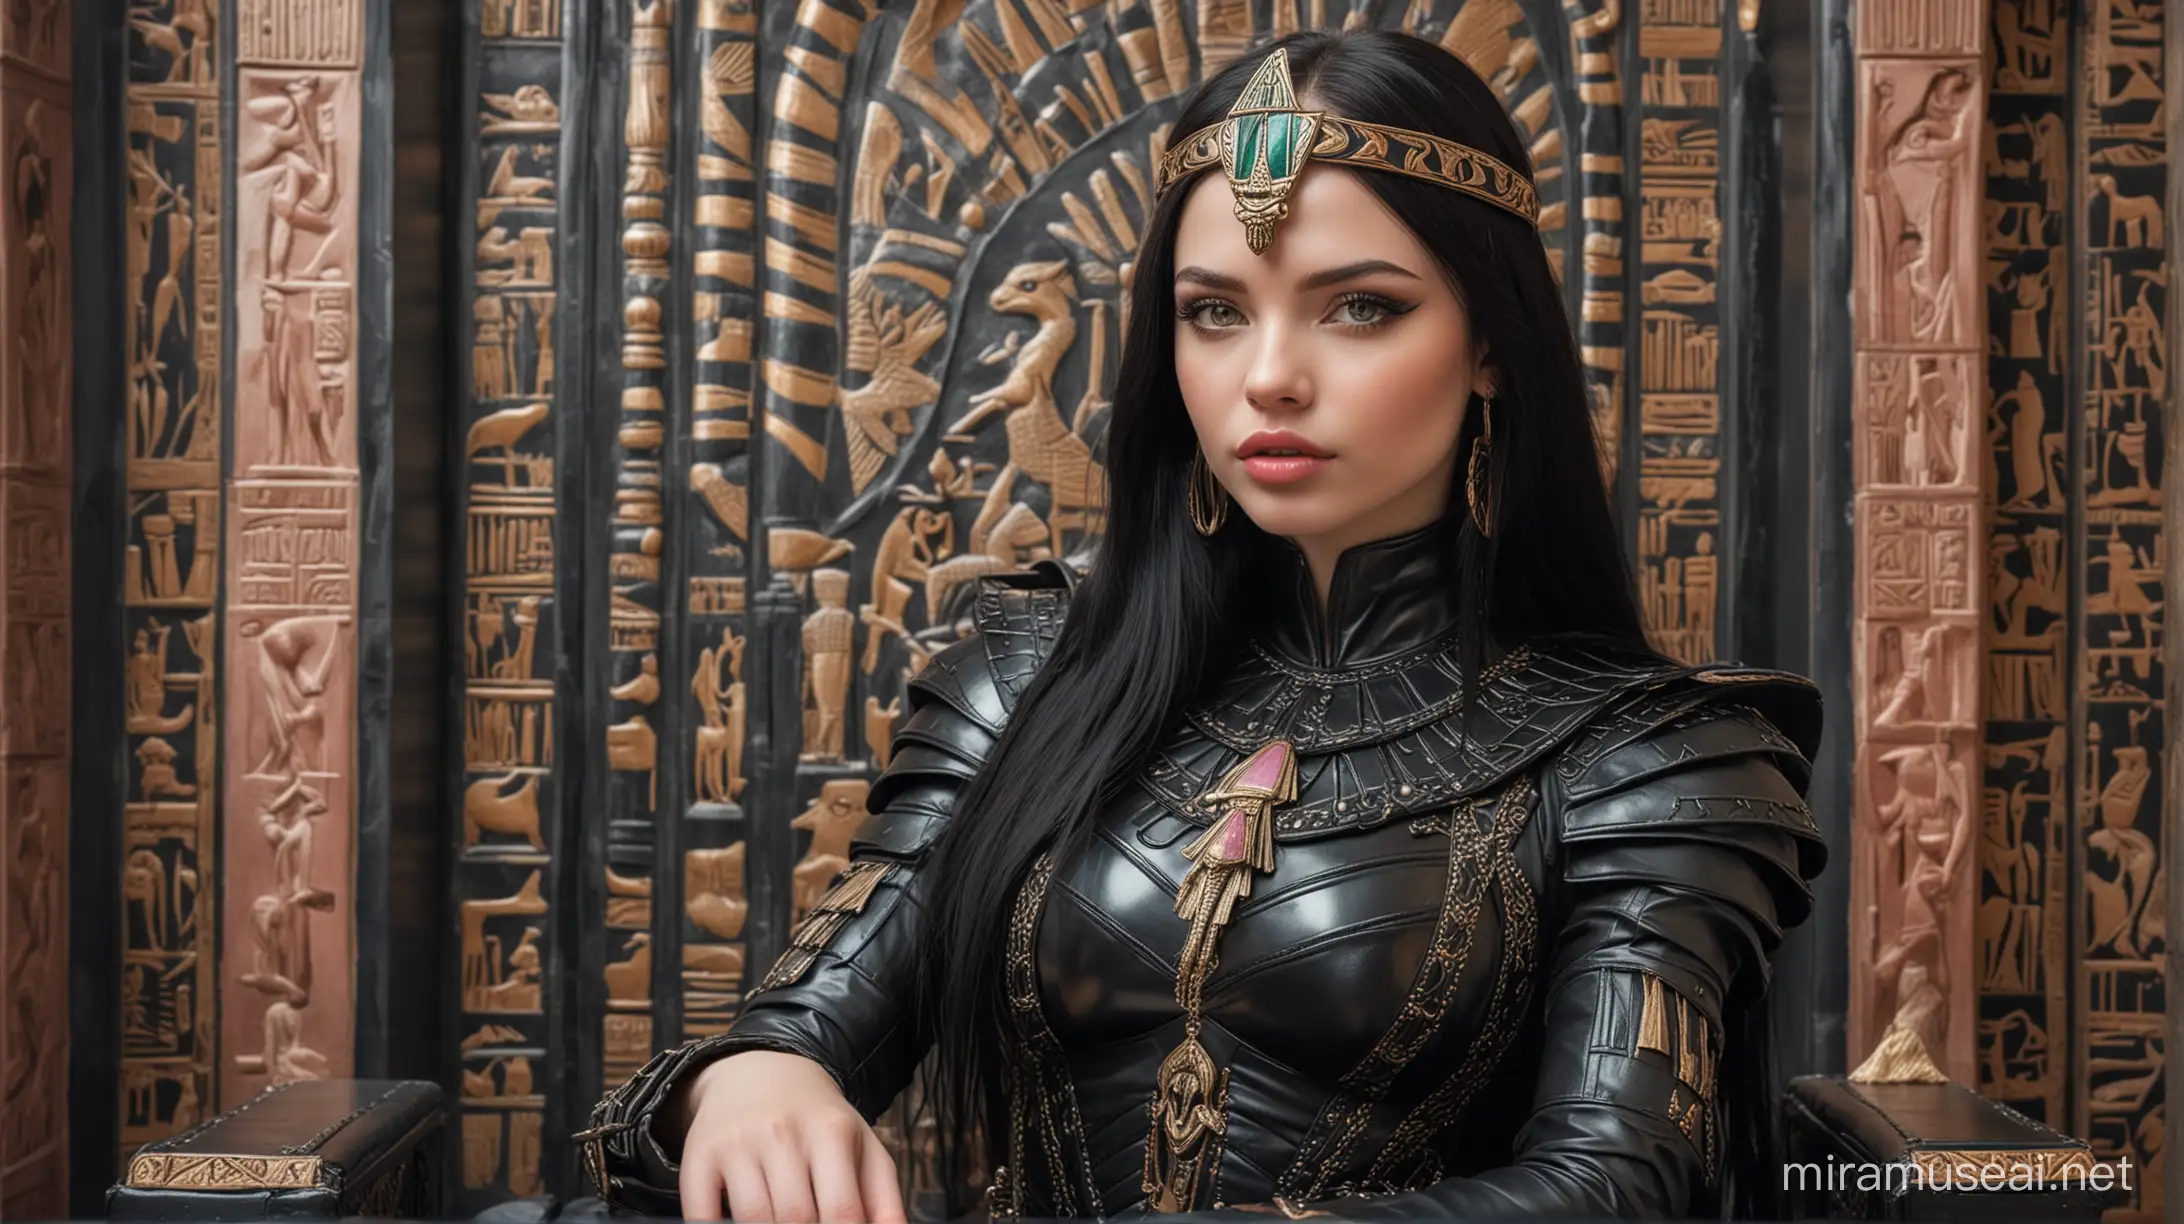 Stunningly beautiful young lady with long black hair and bright green eyes, pale skin and full pink lips, wearing black leather armour and sitting on an Egyptian throne